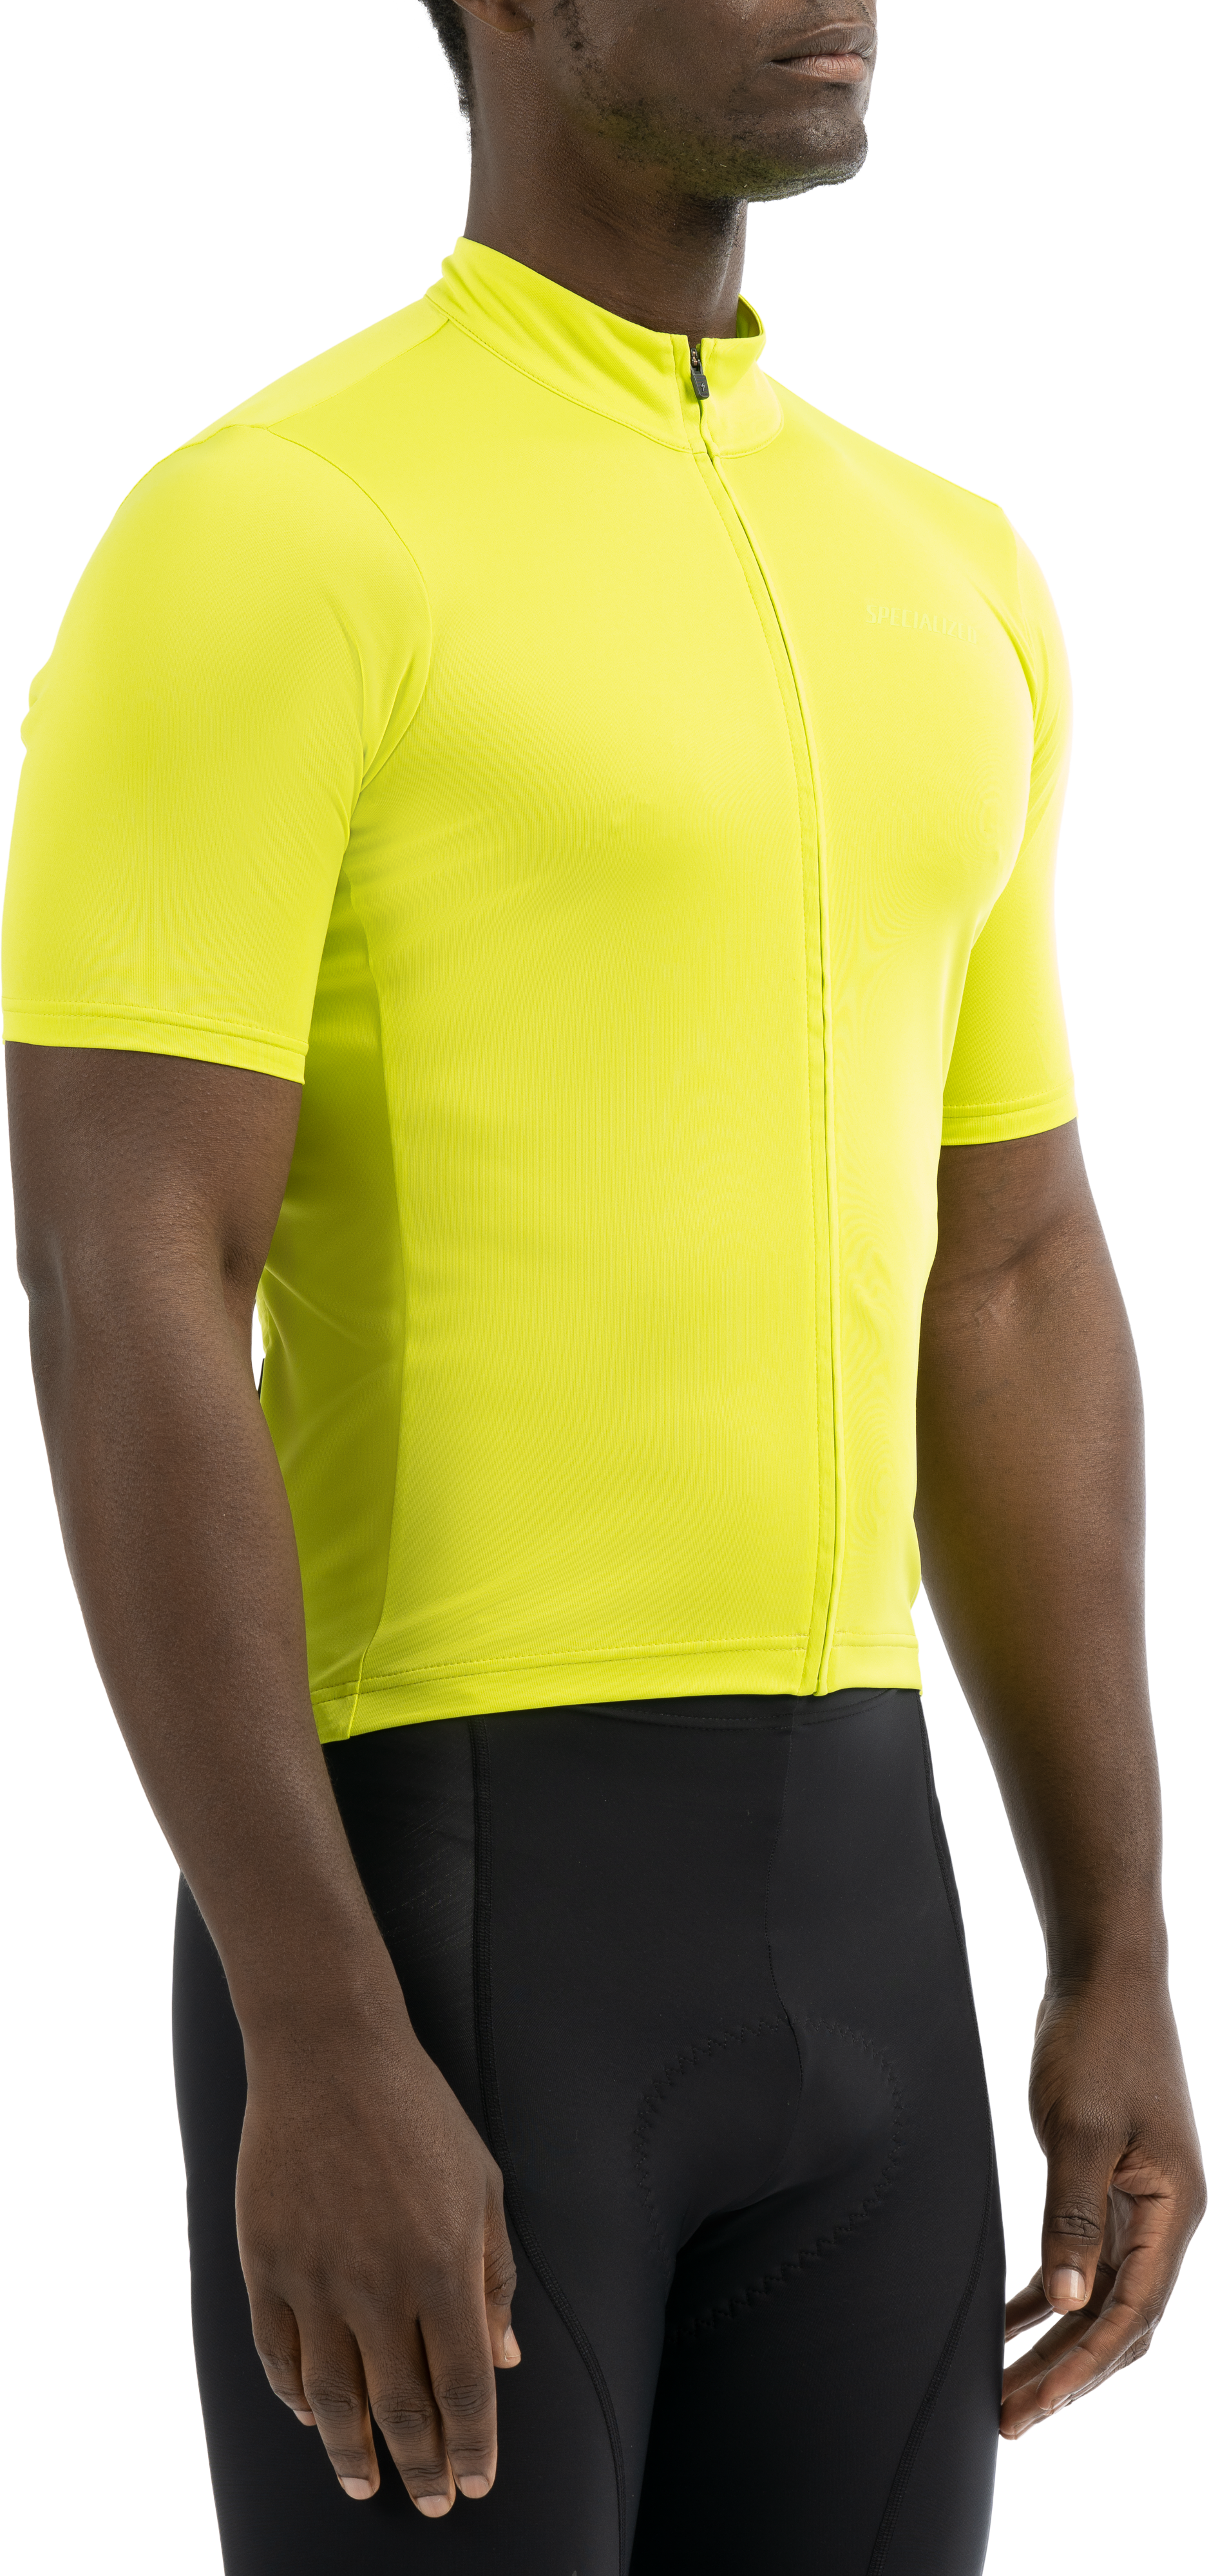 Specialized Women's RBX Classic Short Sleeve Jersey - Michael's